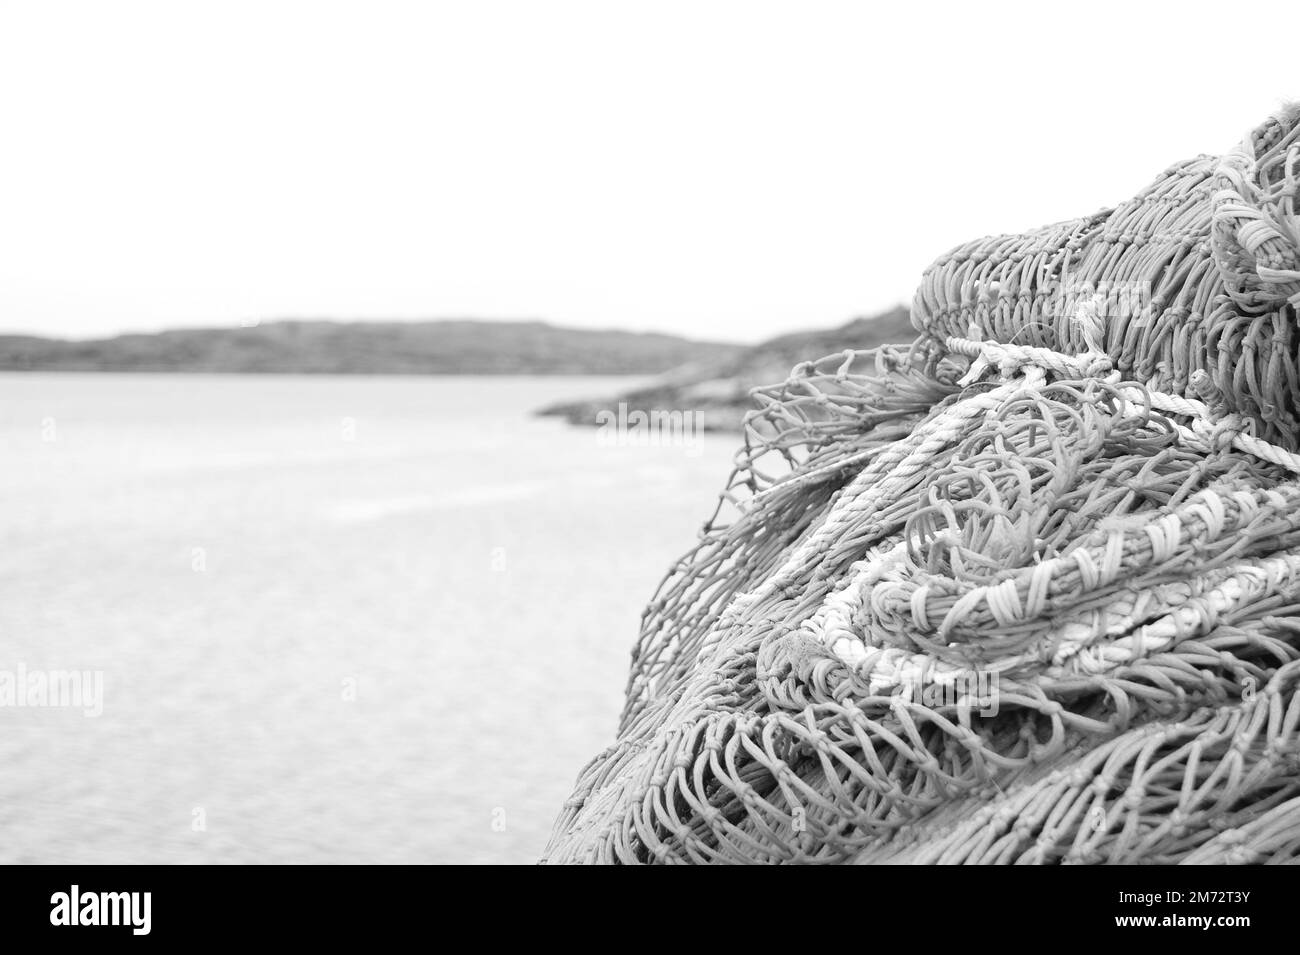 A grayscale of a fishing net against a lake and land seen in the distance  Stock Photo - Alamy